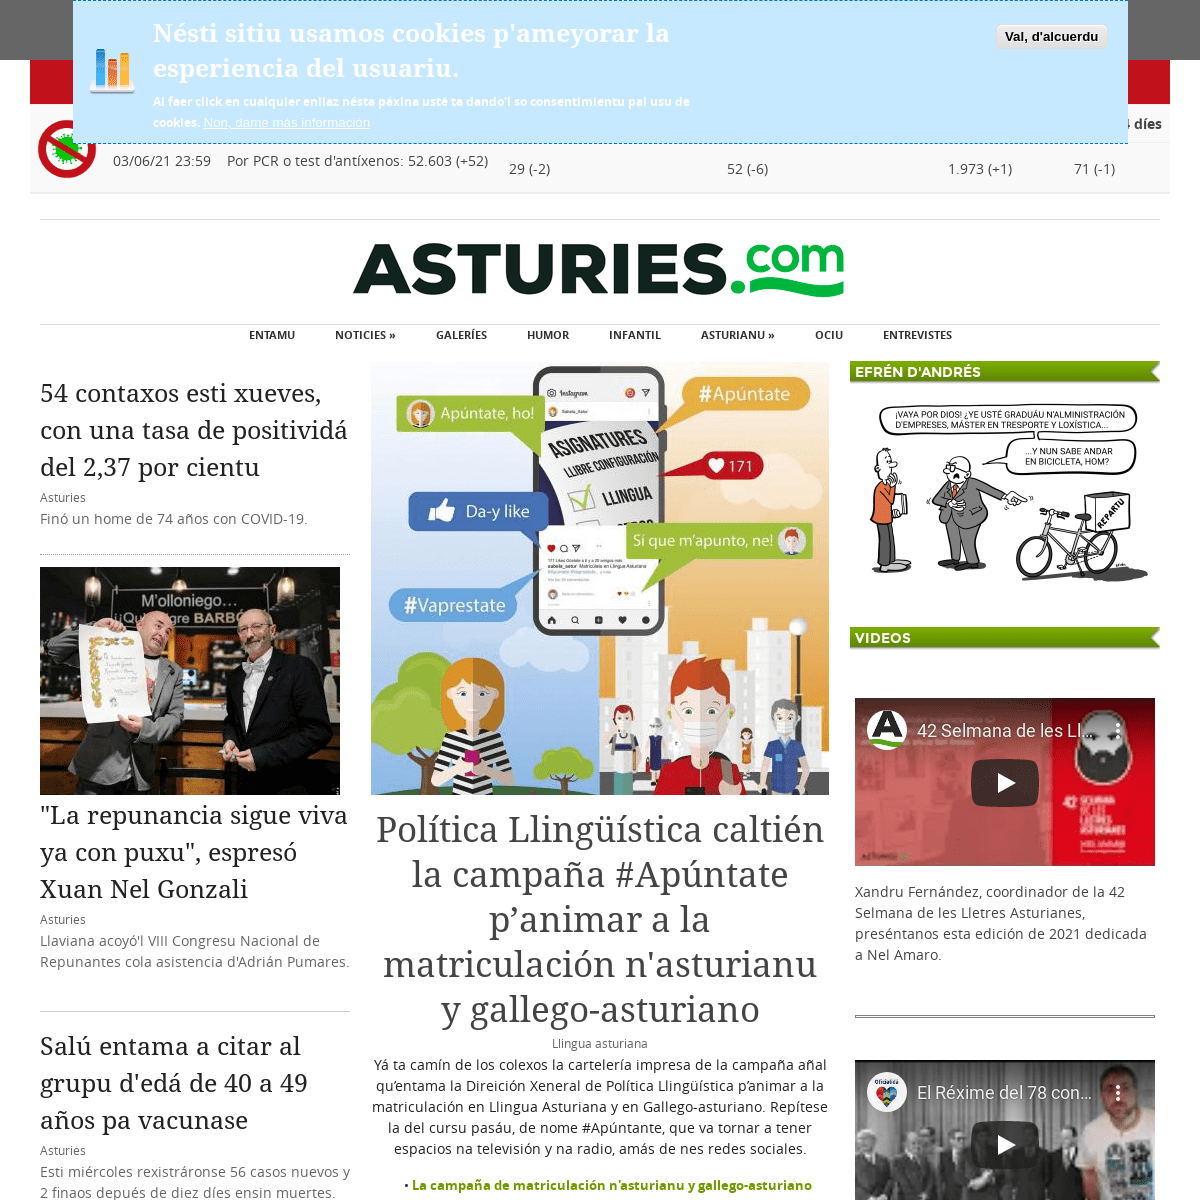 A complete backup of https://asturies.com